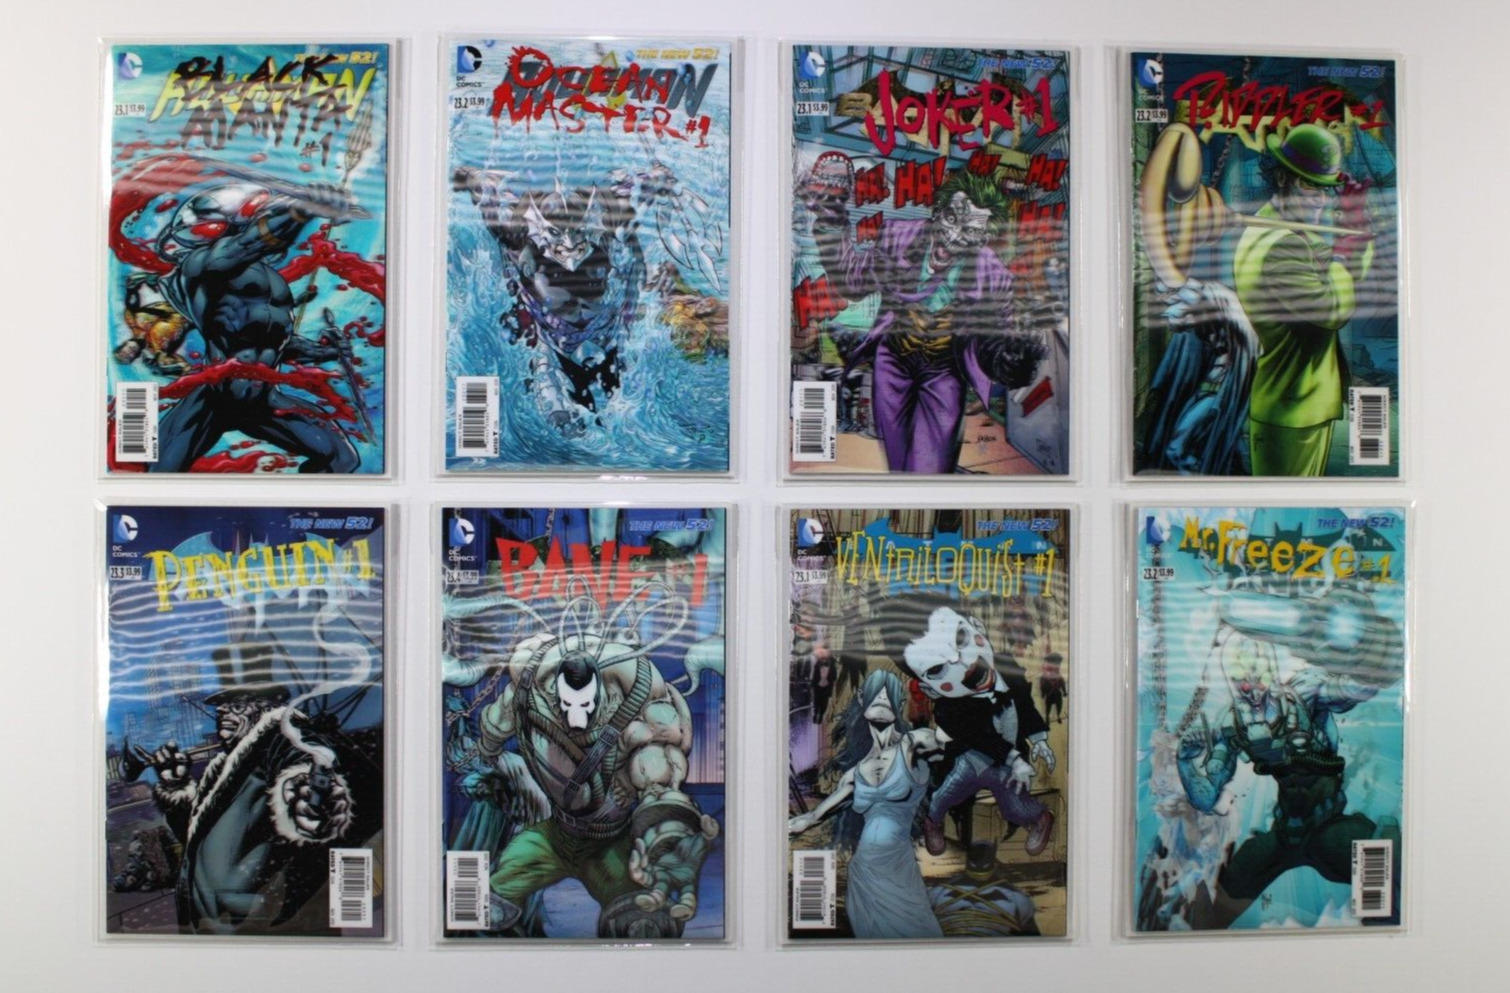 New 52 Villains Month Lenticular / 3D covers complete (52 issues) DC Comics 2013